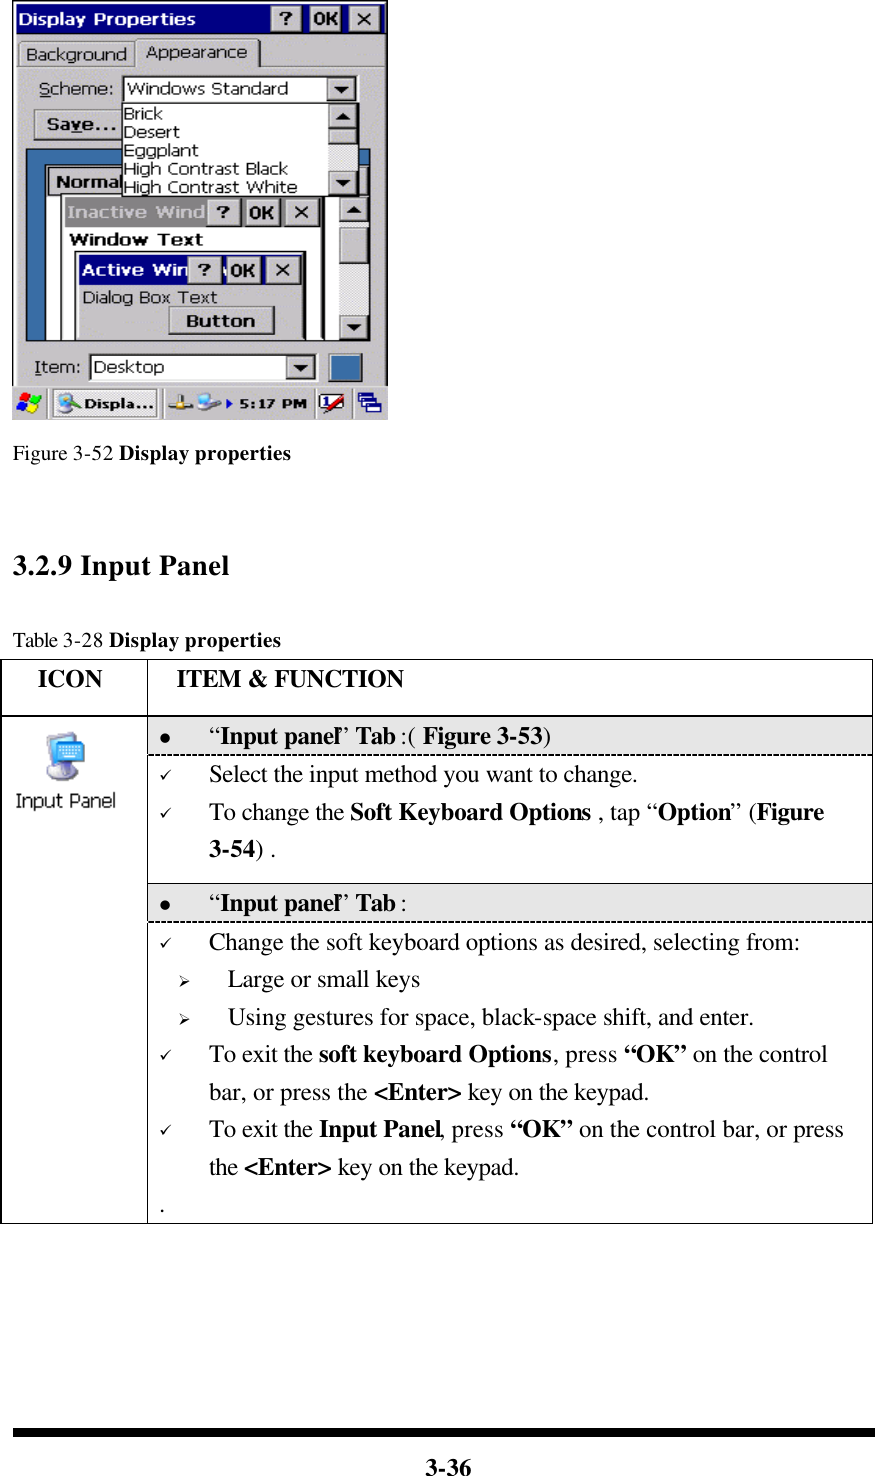  3-36      Figure 3-52 Display properties     3.2.9 Input Panel  Table 3-28 Display properties   ICON  ITEM &amp; FUNCTION l “Input panel” Tab :( Figure 3-53)   ü Select the input method you want to change. ü To change the Soft Keyboard Options , tap “Option” (Figure 3-54) . l “Input panel” Tab :    ü Change the soft keyboard options as desired, selecting from: Ø Large or small keys Ø Using gestures for space, black-space shift, and enter. ü To exit the soft keyboard Options, press “OK” on the control bar, or press the &lt;Enter&gt; key on the keypad. ü To exit the Input Panel, press “OK” on the control bar, or press the &lt;Enter&gt; key on the keypad. .  